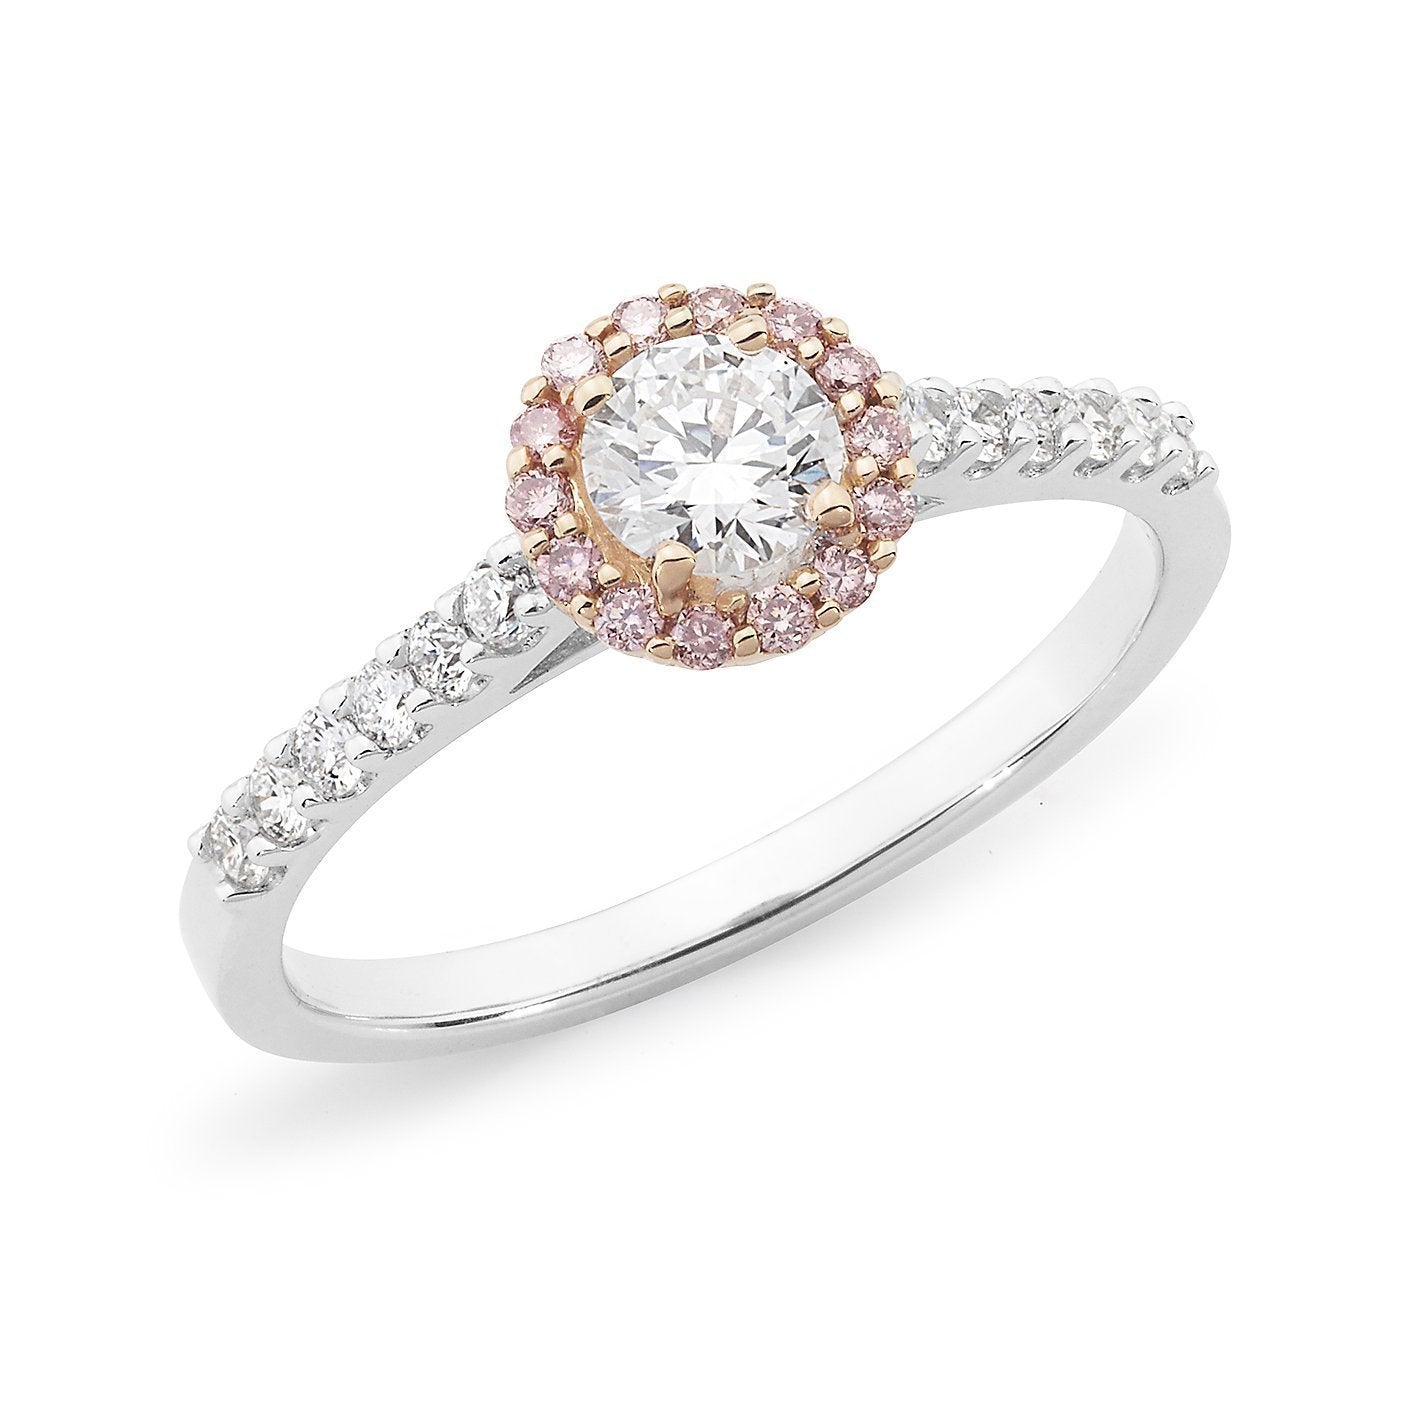 PINK CAVIAR 0.61ct White Round Brilliant Cut & Pink Diamond Halo Engagement Ring in 18ct White Gold